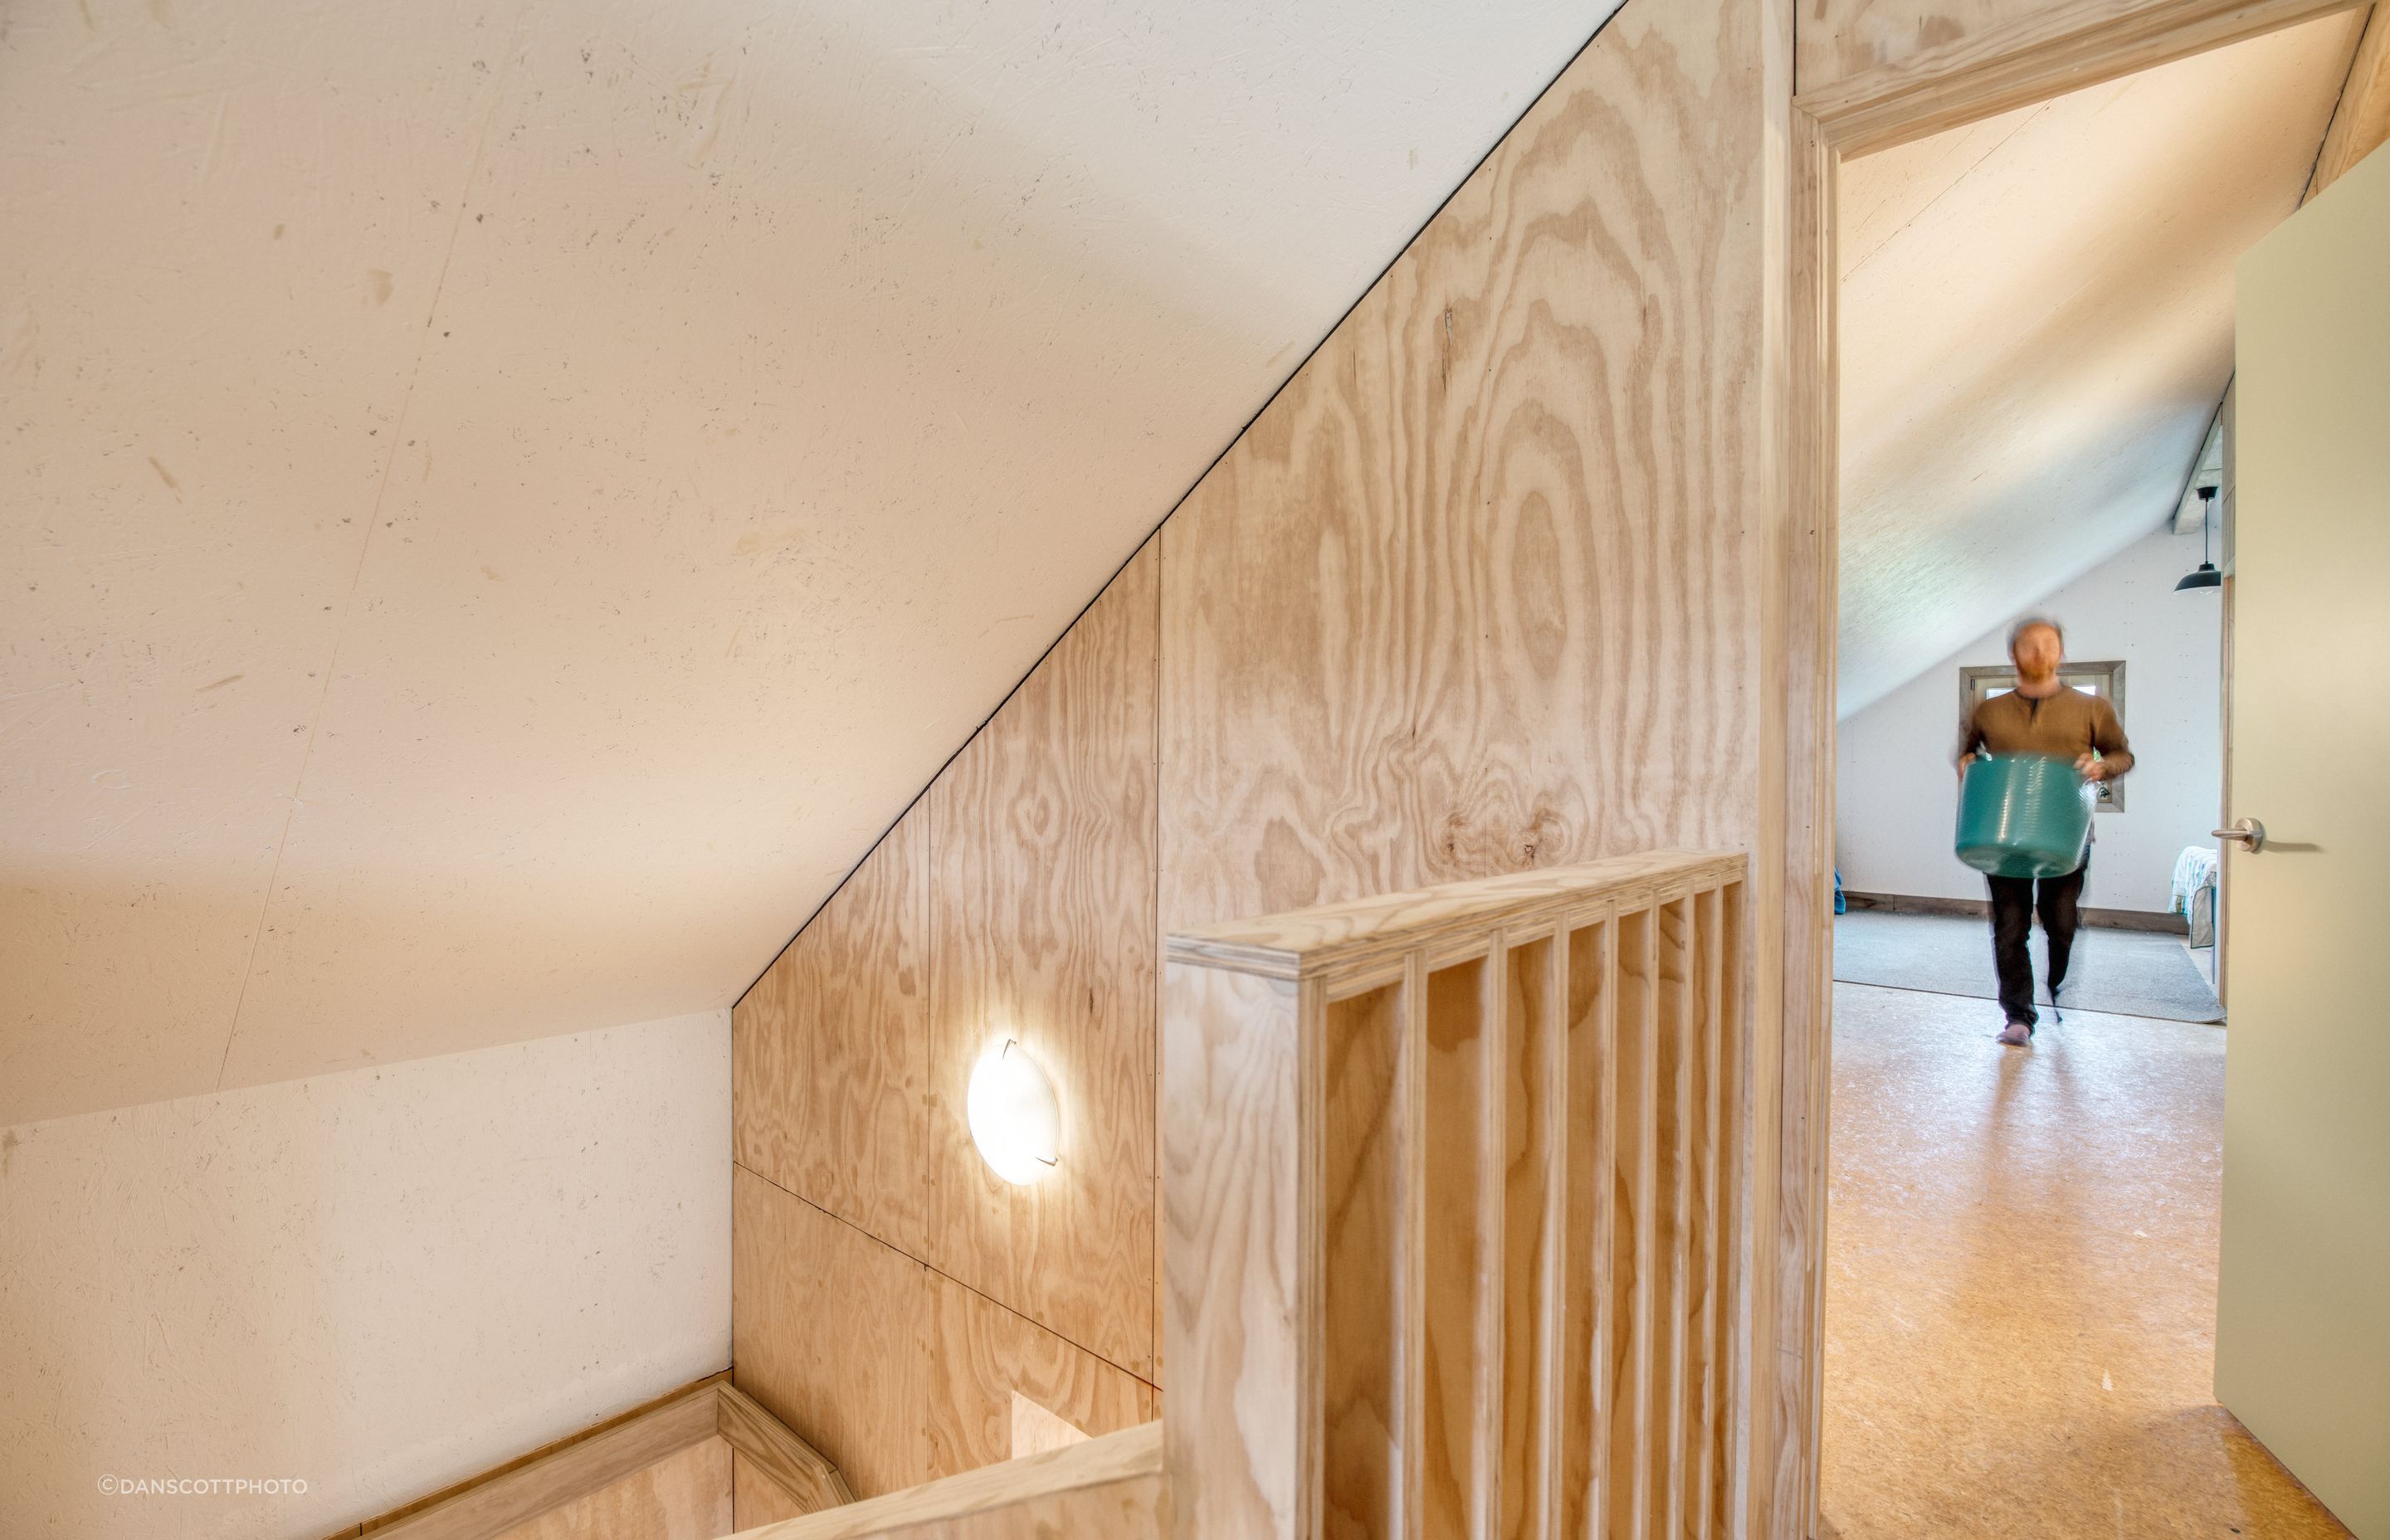 The ceilings are painted Resene Half Sea Fog, with the texture of the SIPs strandboard still visible. The shadow gaps between the SIPs and the plywood are to highlight the concept of the interior being slotted into the envelope of the house.